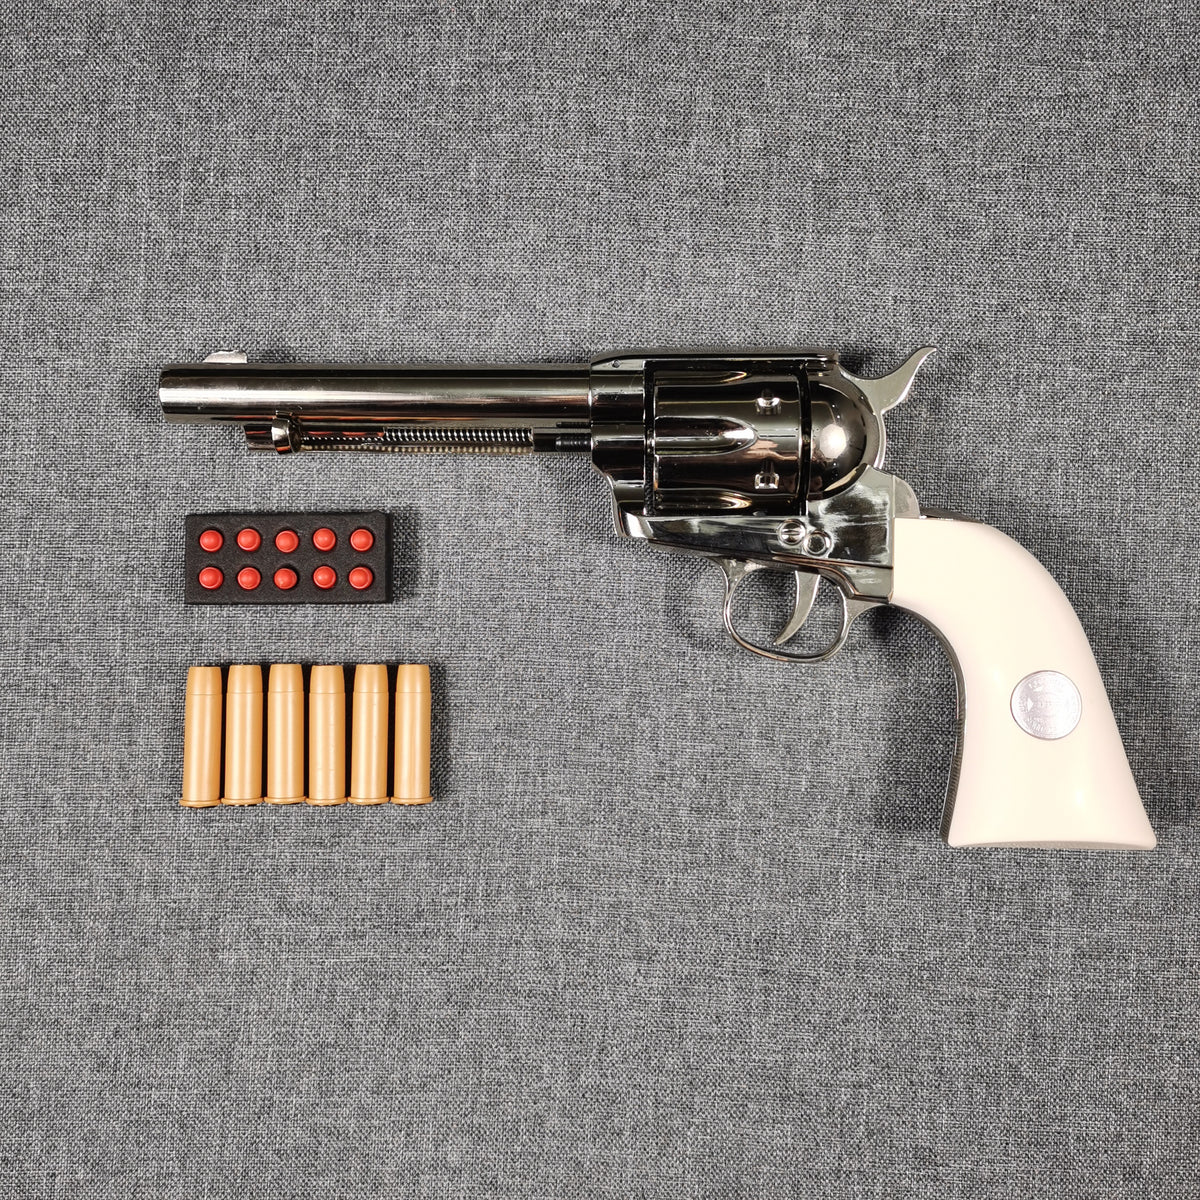 1873 Colt Single-Action Army revolver Toy – Csnoobs Online Store